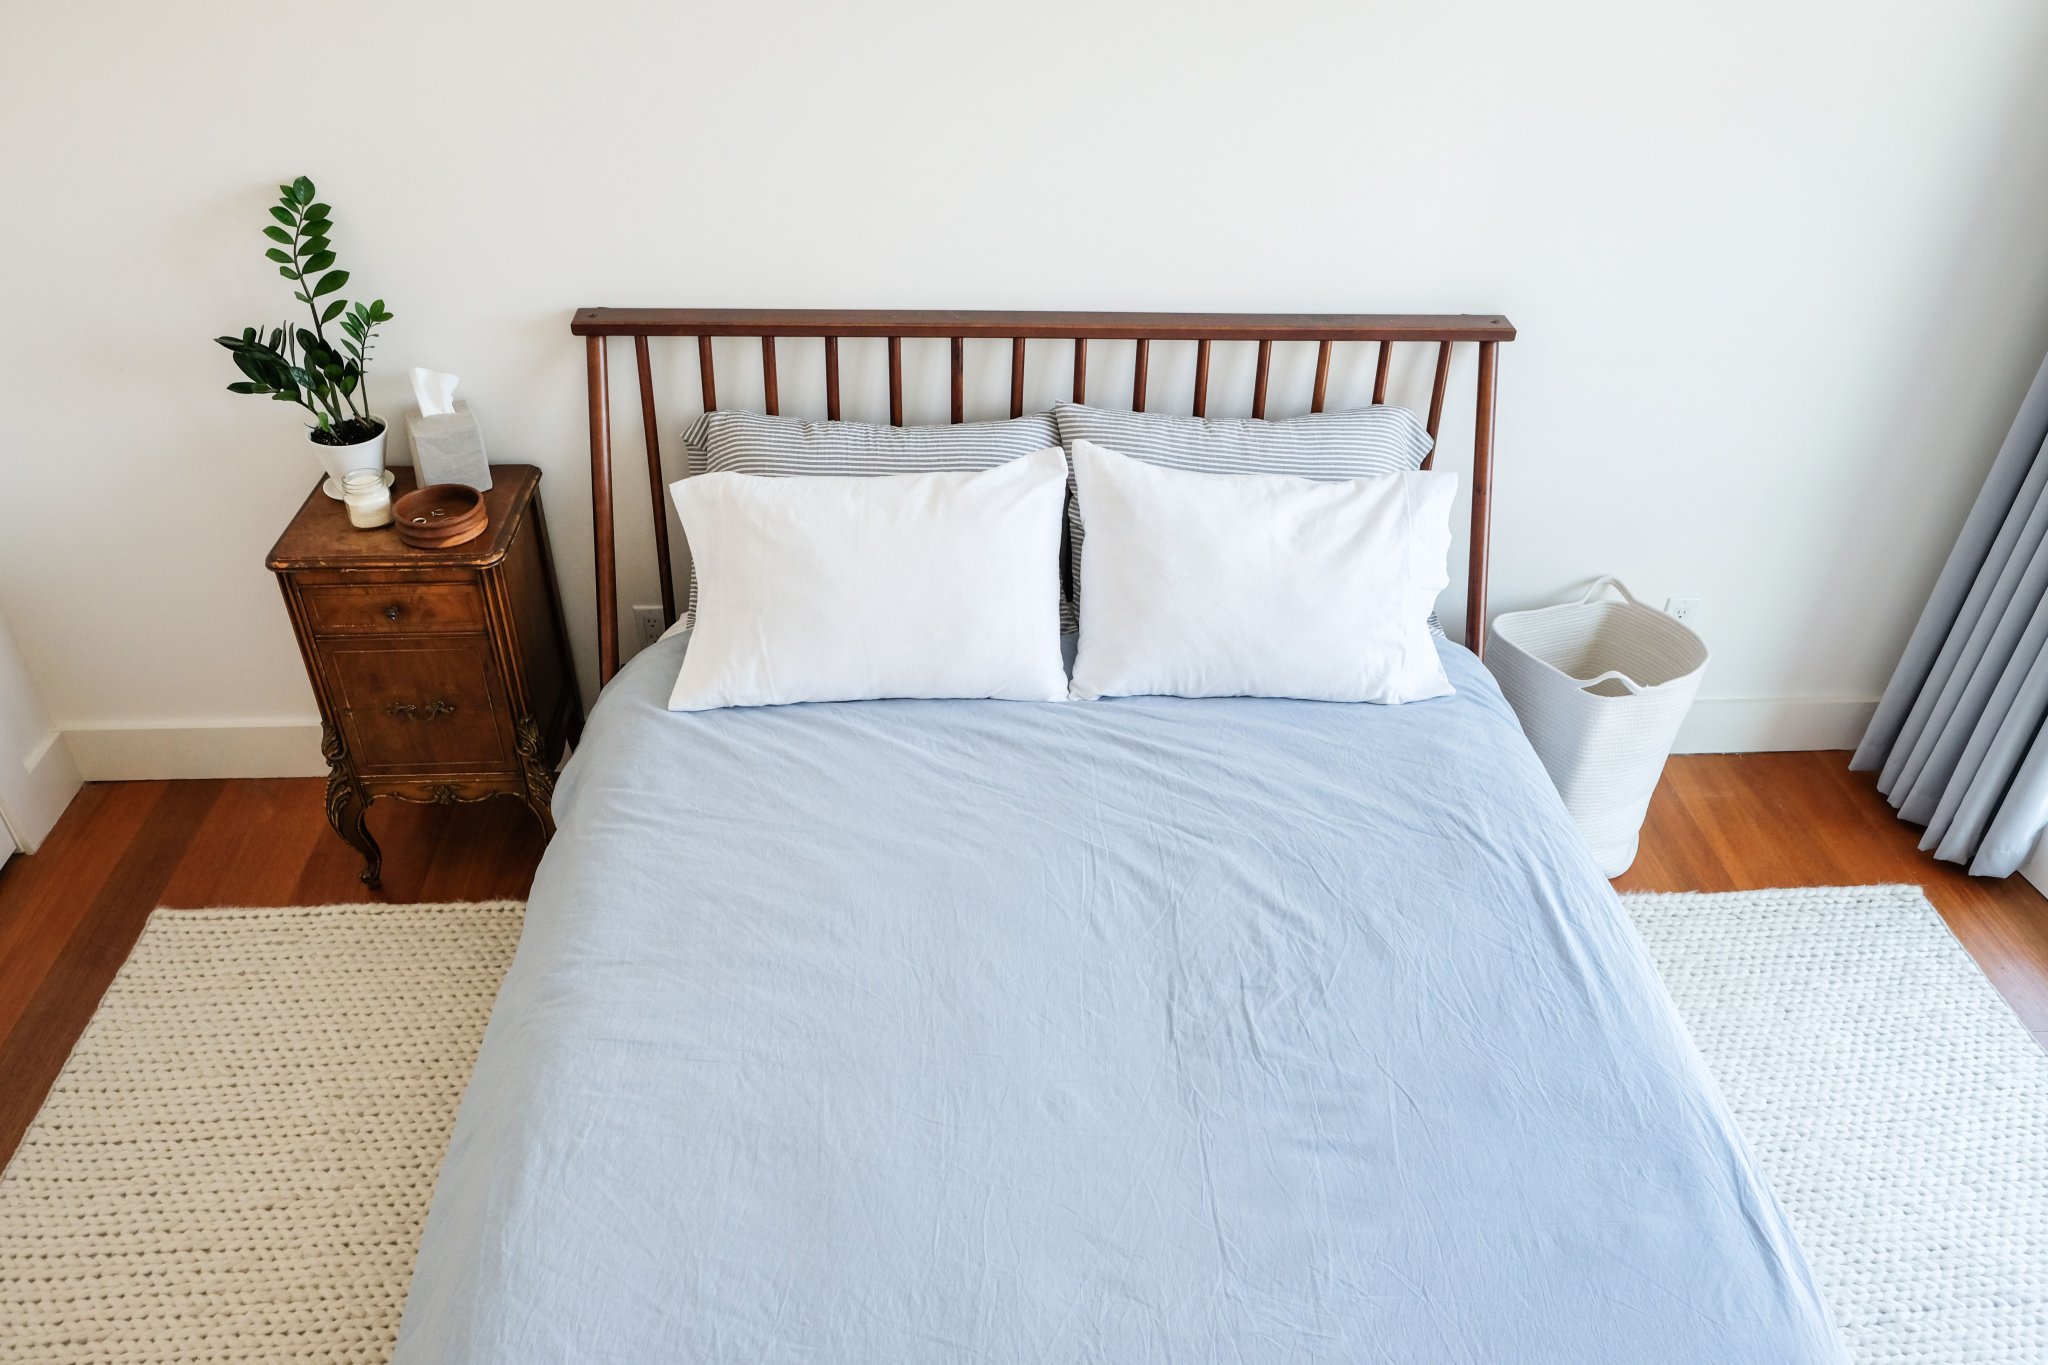 6 Ways to Make More Space Even In The Tiniest Bedroom